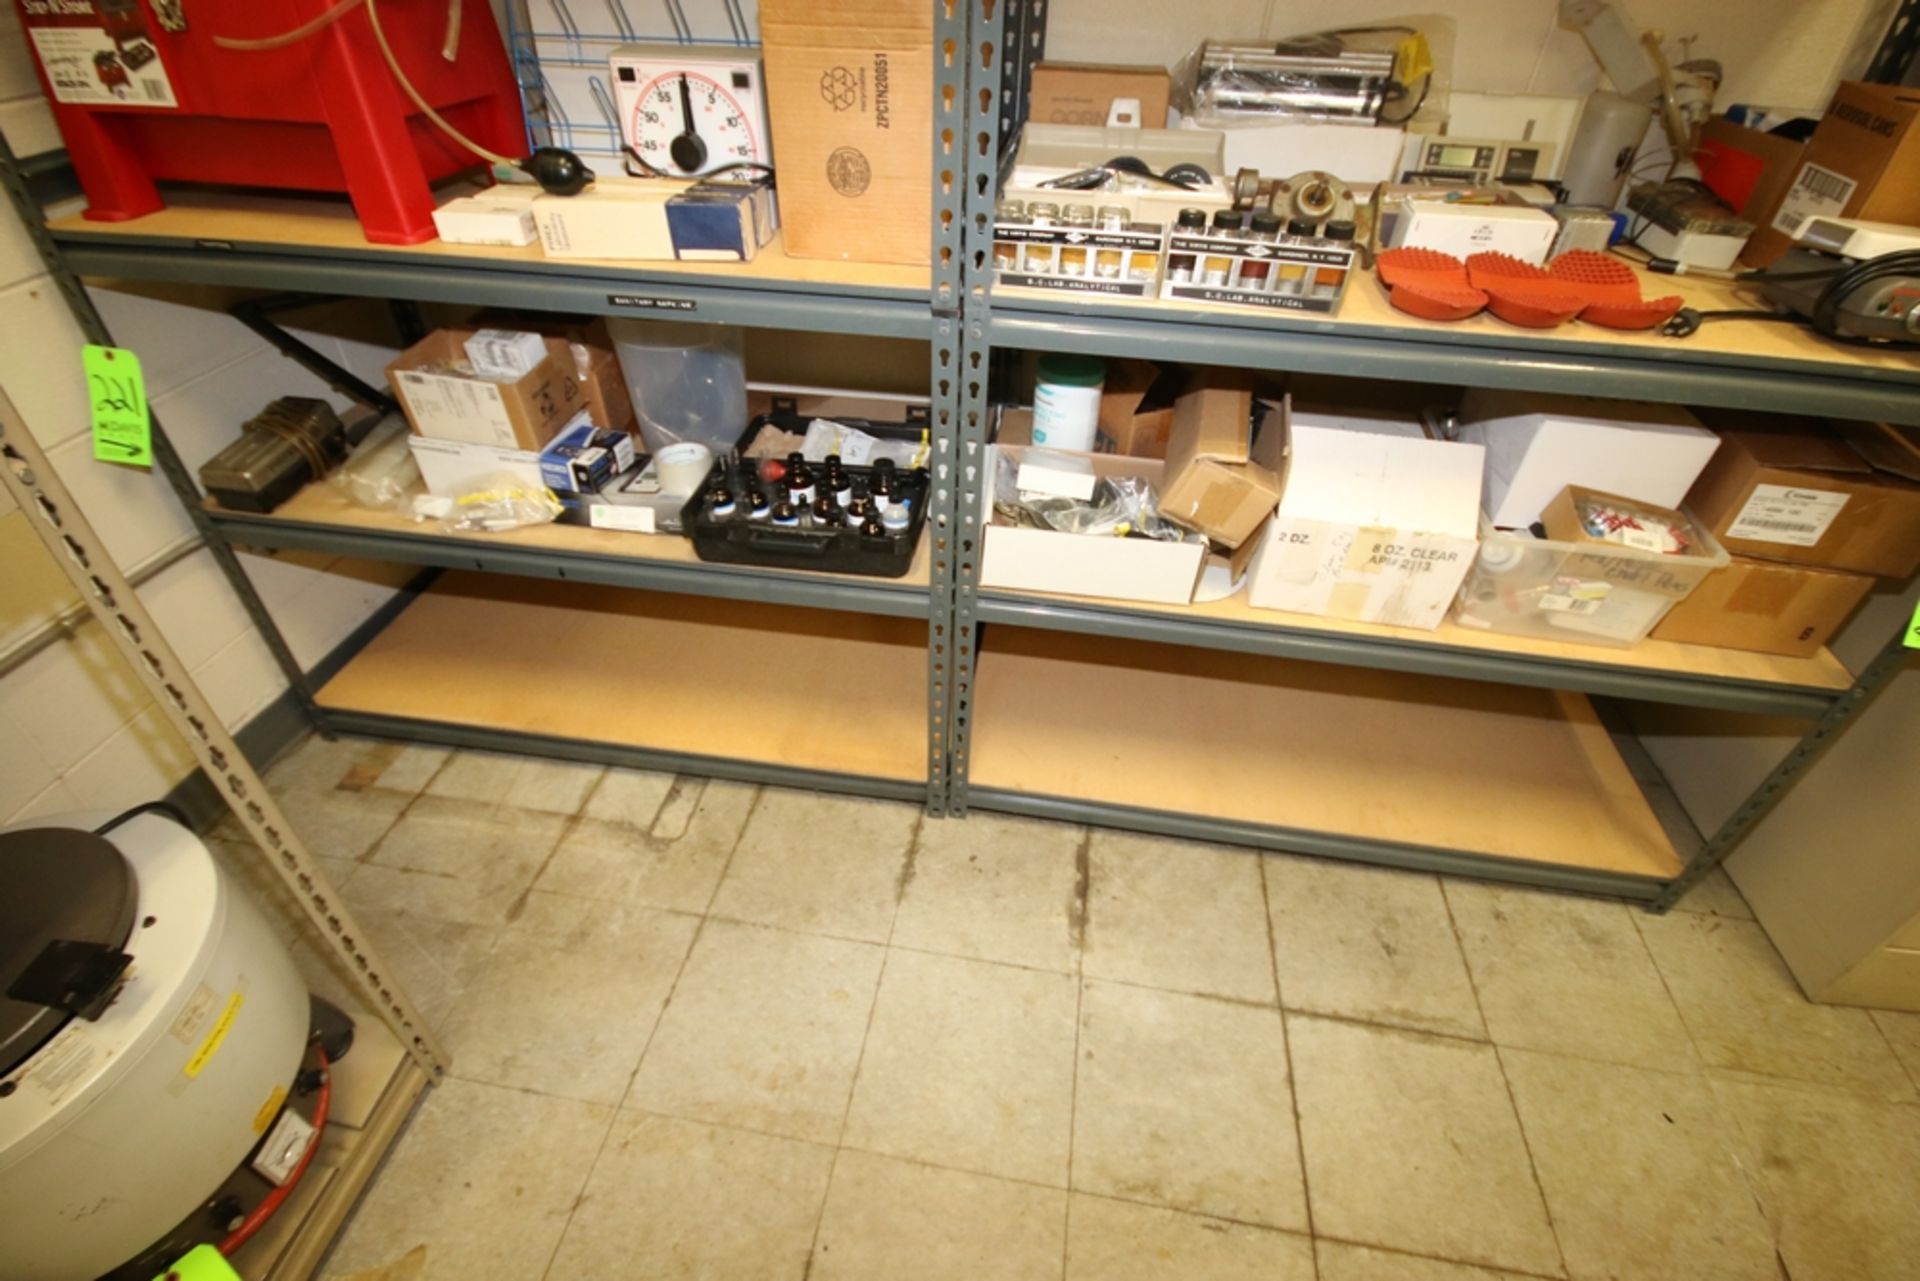 Contents of Shelf, Includes Lab Plastic Ware in Boxes, Solvent Drip Kit in Hard Case, Plastic Lab